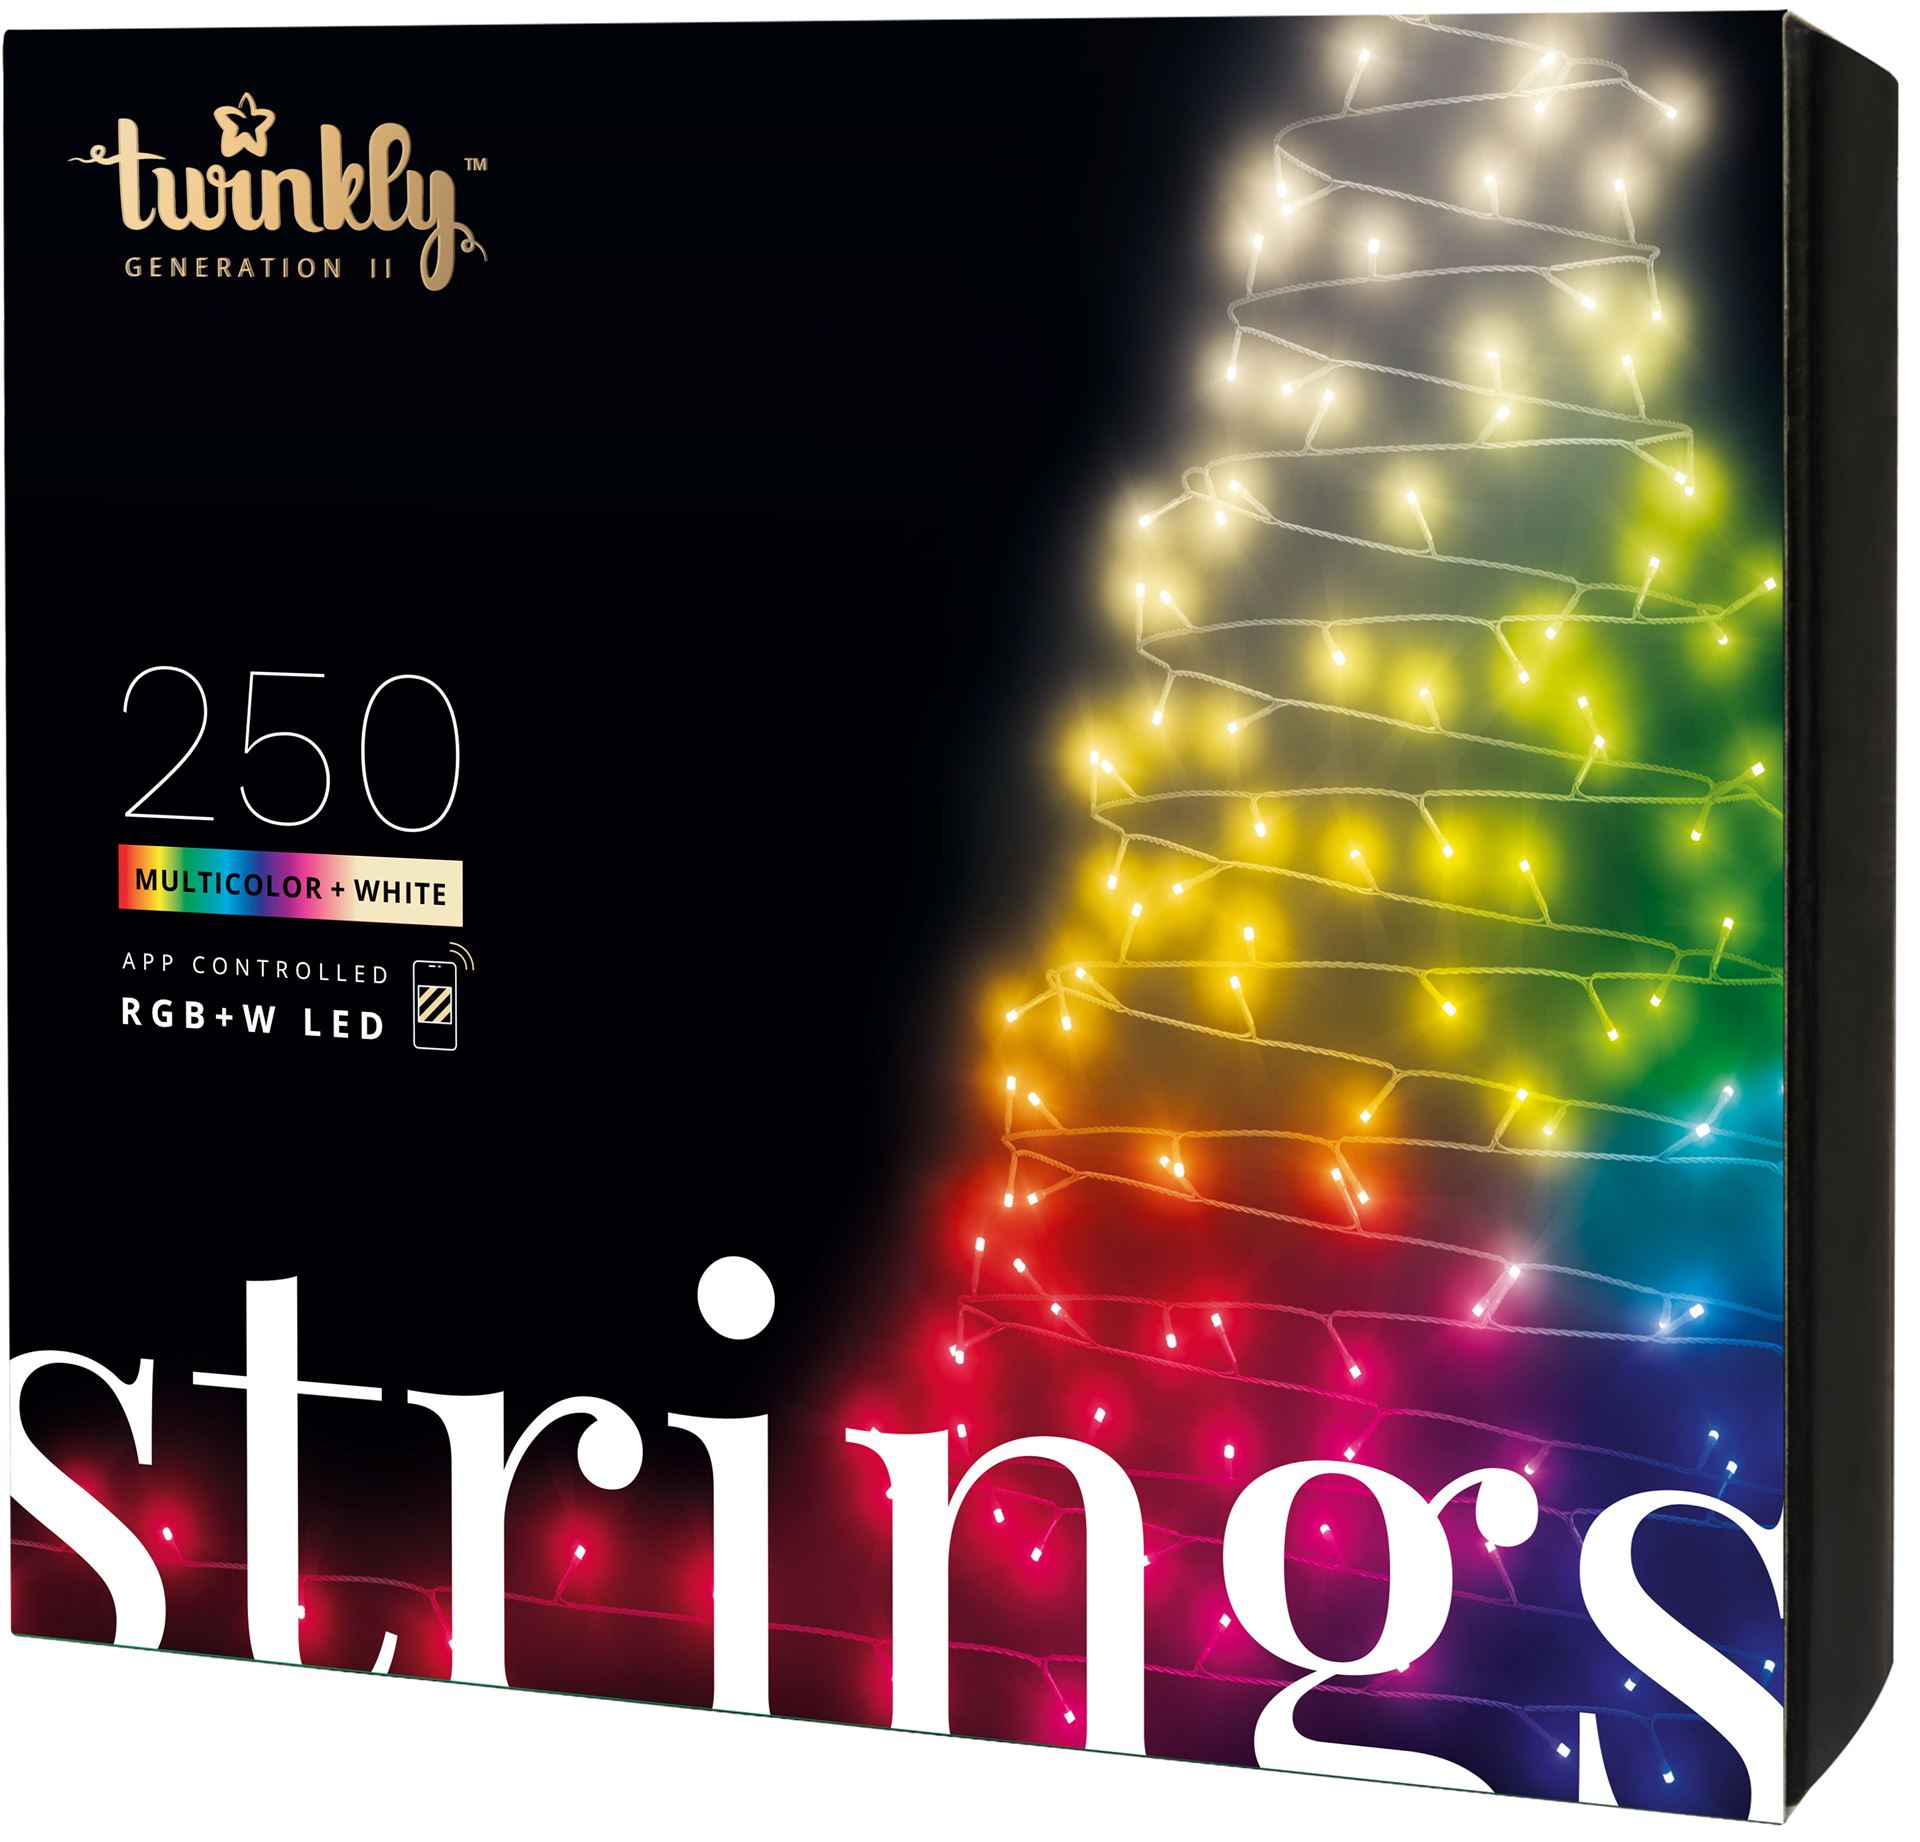 Twinkly - smart Christmas tree lights "Special Edition" - 20 m - 250 colored & warm white LED lights (RGBW) - with mobile app, timer & dimmer